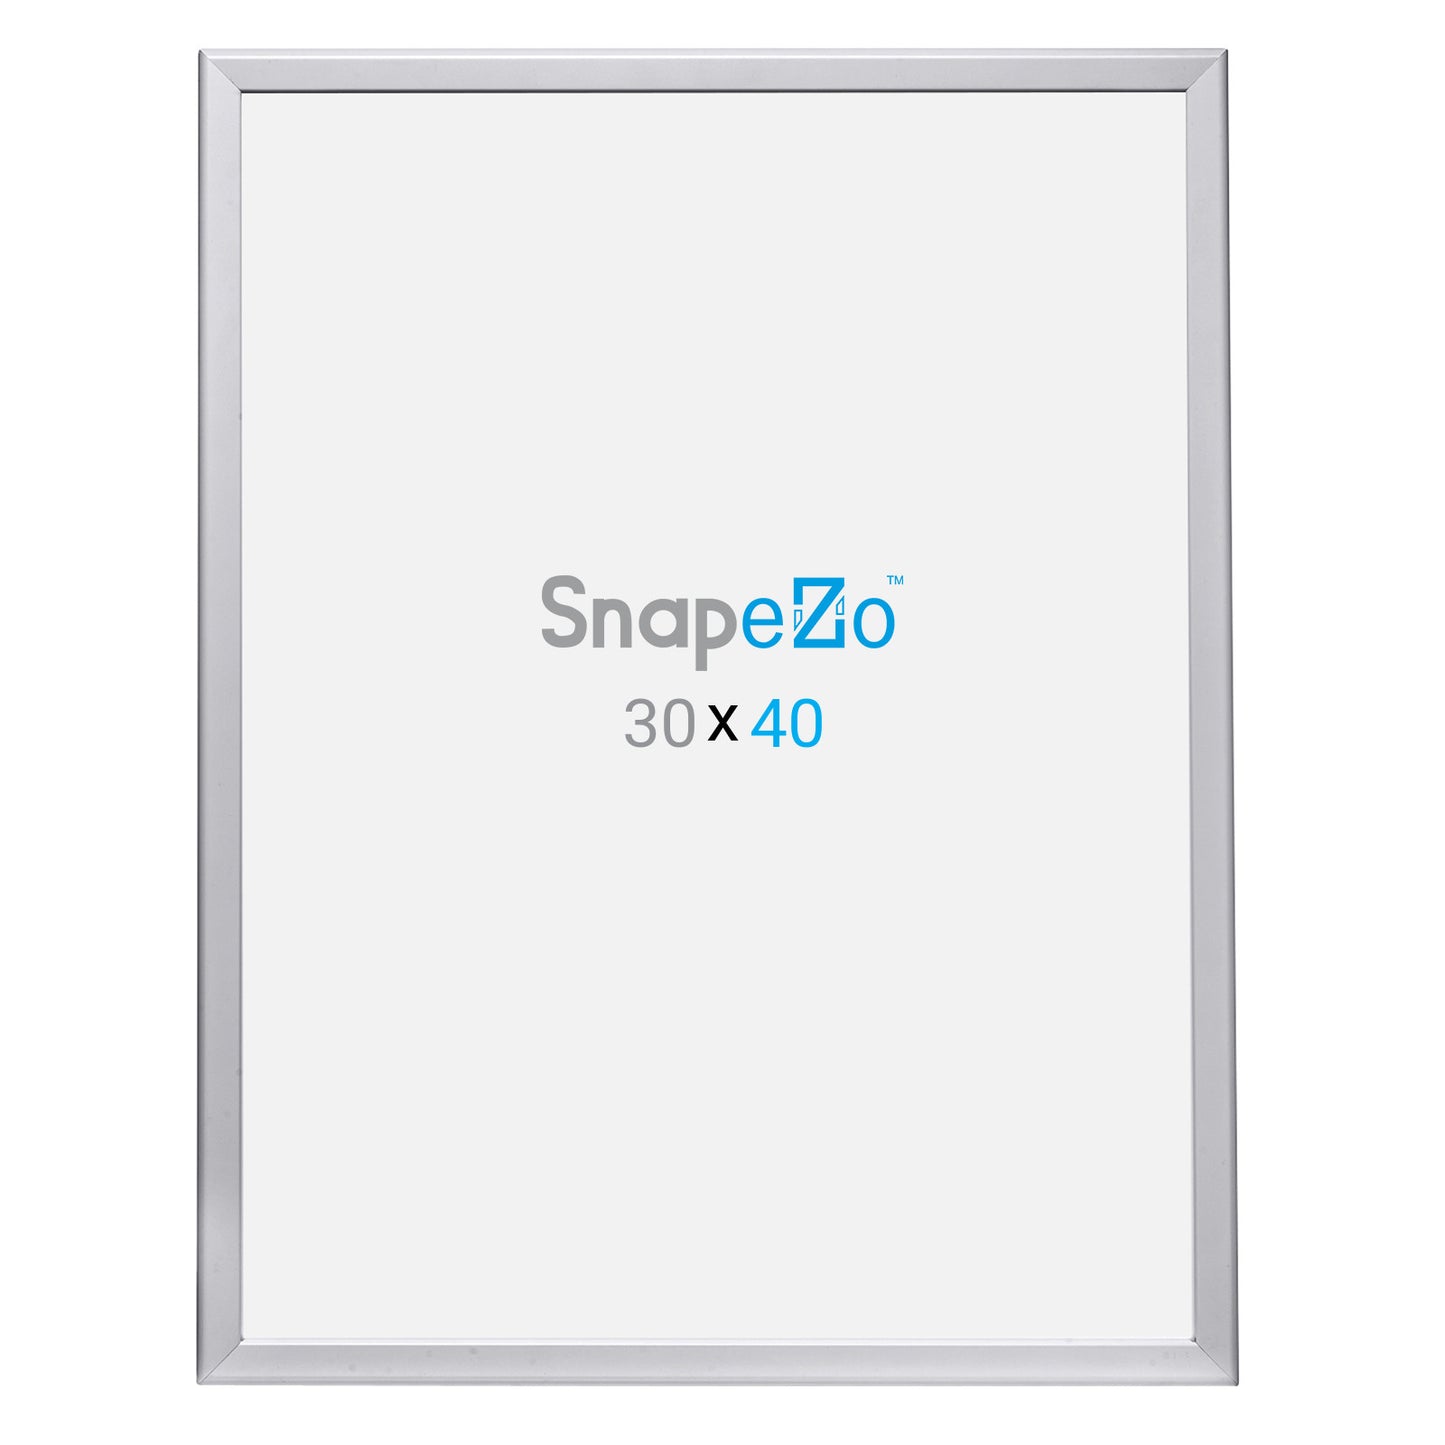 Twin-Pack of Snapezo® Silver 30x40 Movie Poster Frame - 1.25" Profile